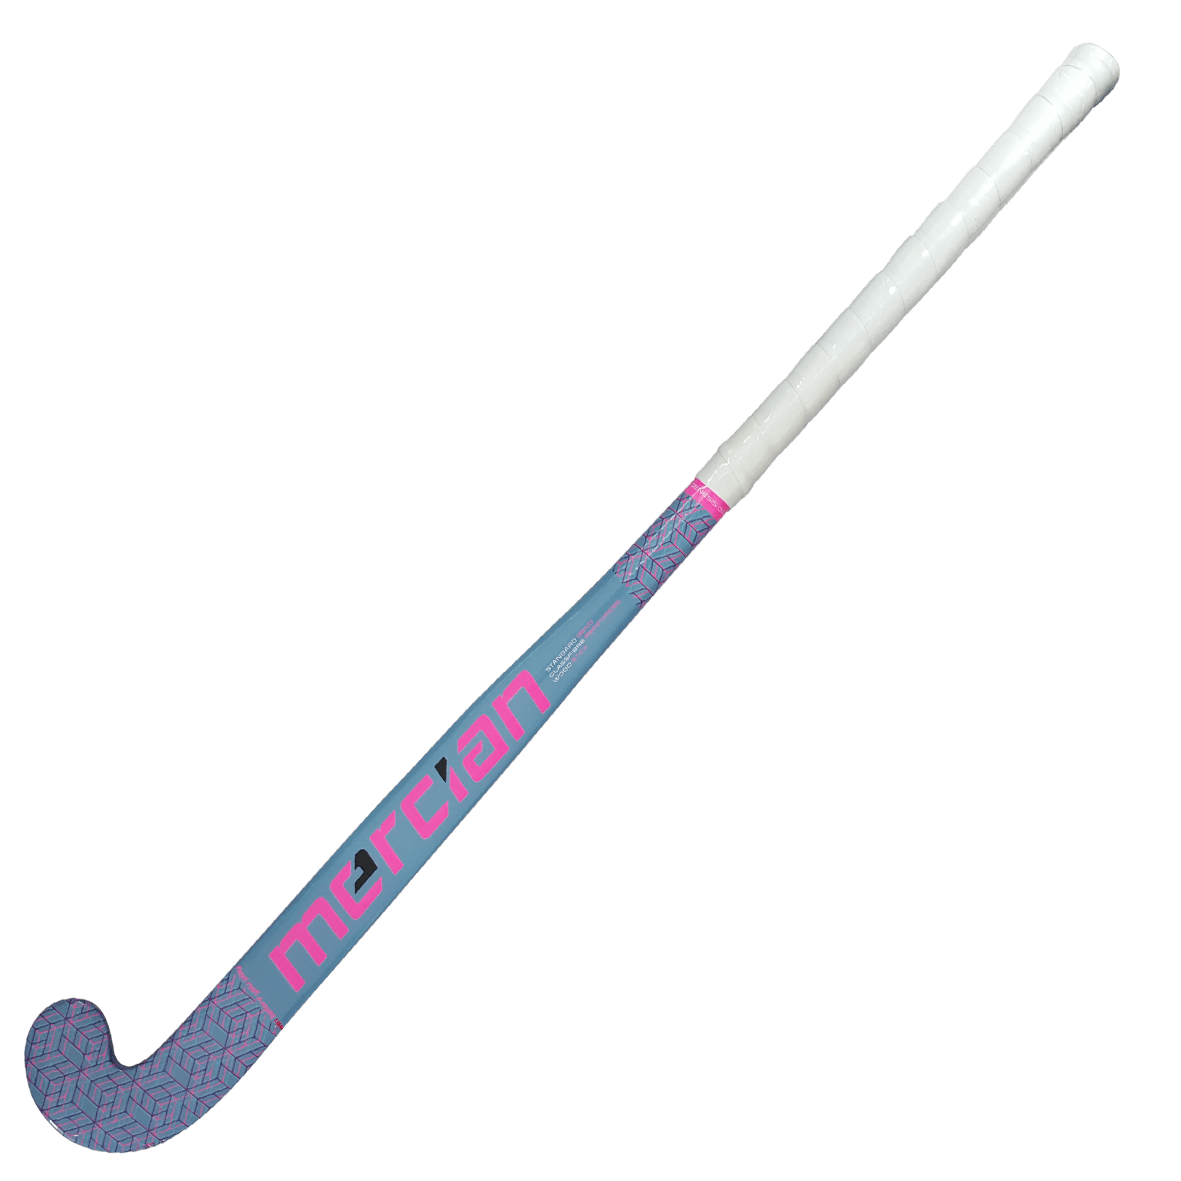 Genesis 0.4 Lilac / Pink (2020) | The Hockey Centre